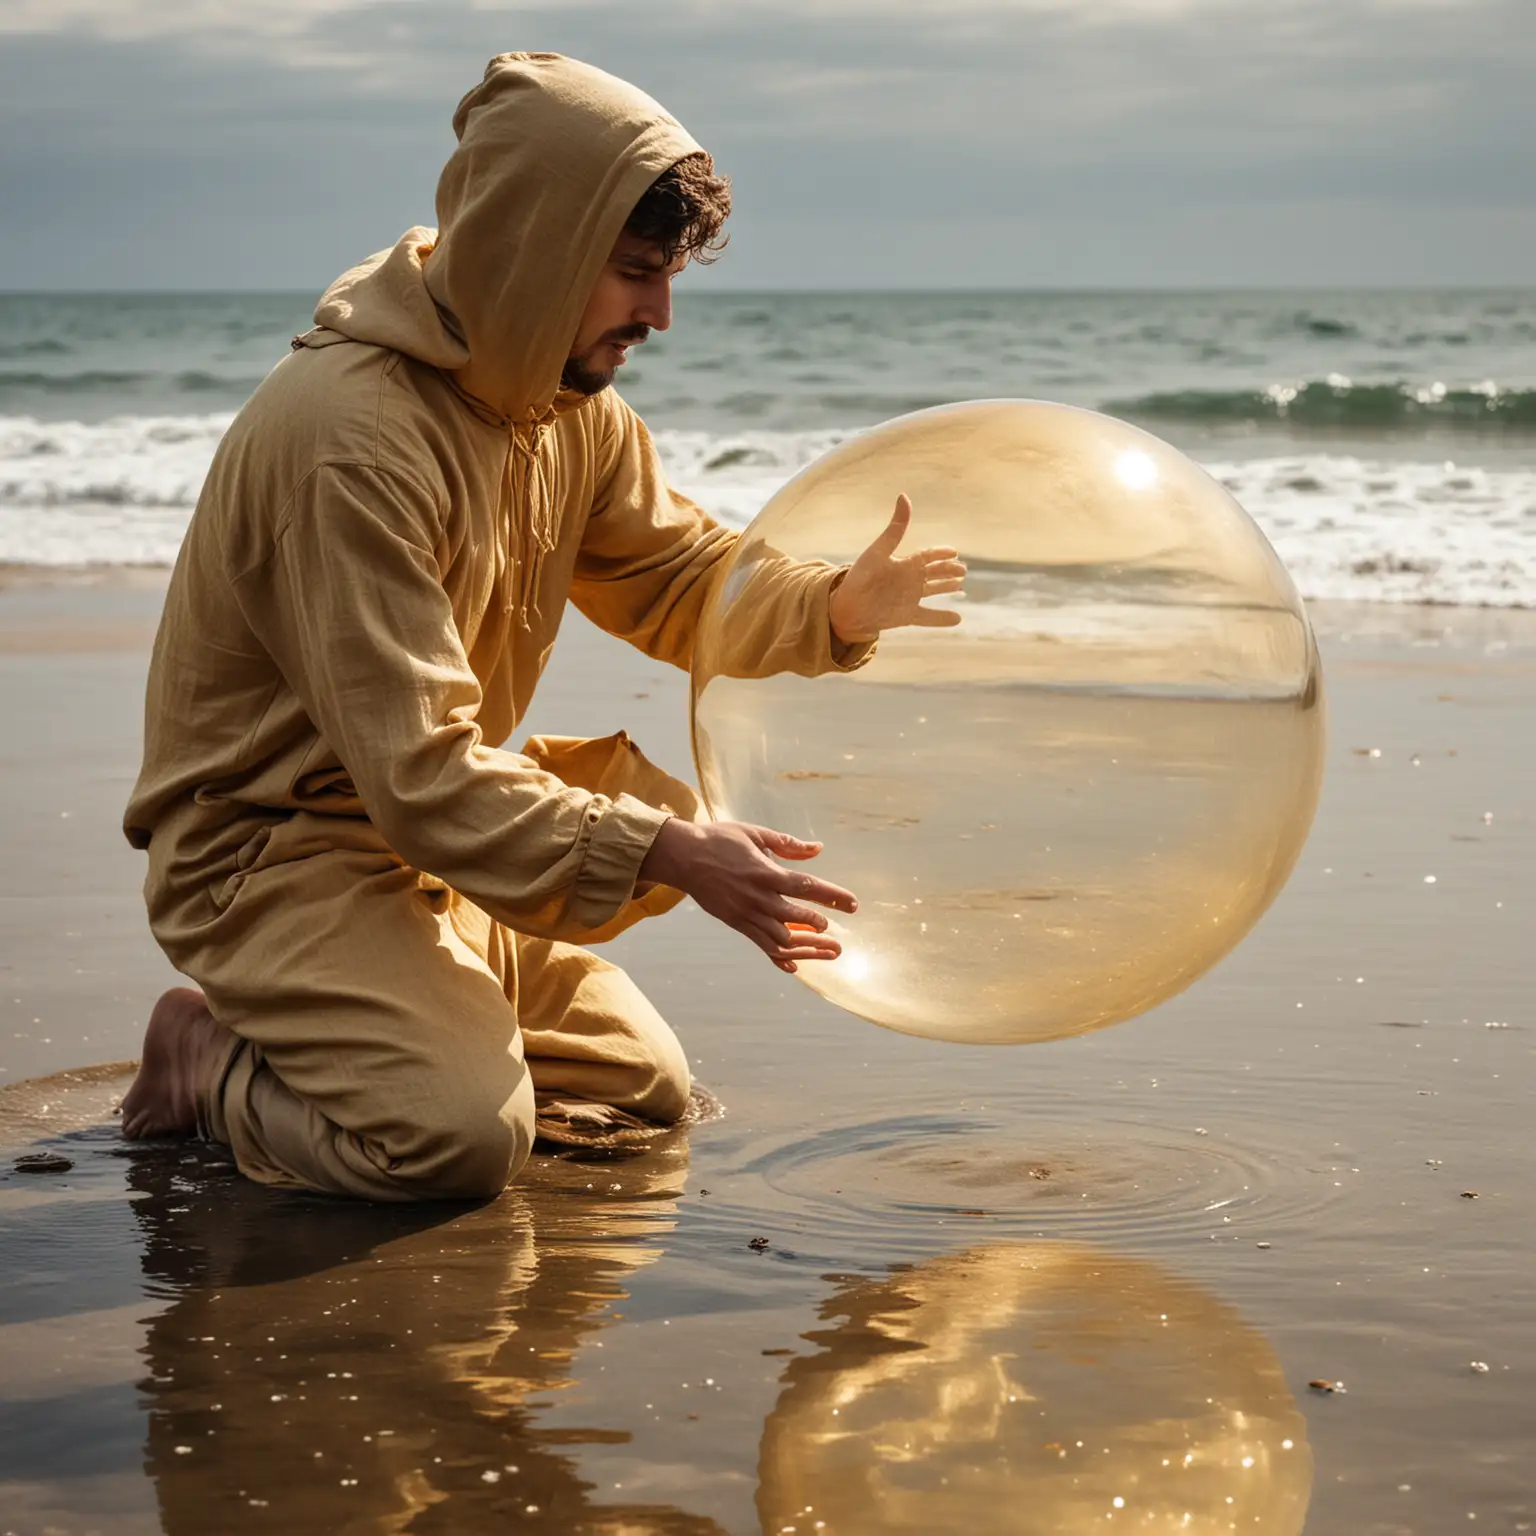 On the seashore, there is a man wearing a golden raw linen tunic and a hoodie. The man's face is not visible. He is kneeling down and observing his reflection on a large, golden transparent bubble. His hand is reaching out gently to touch the bubble.